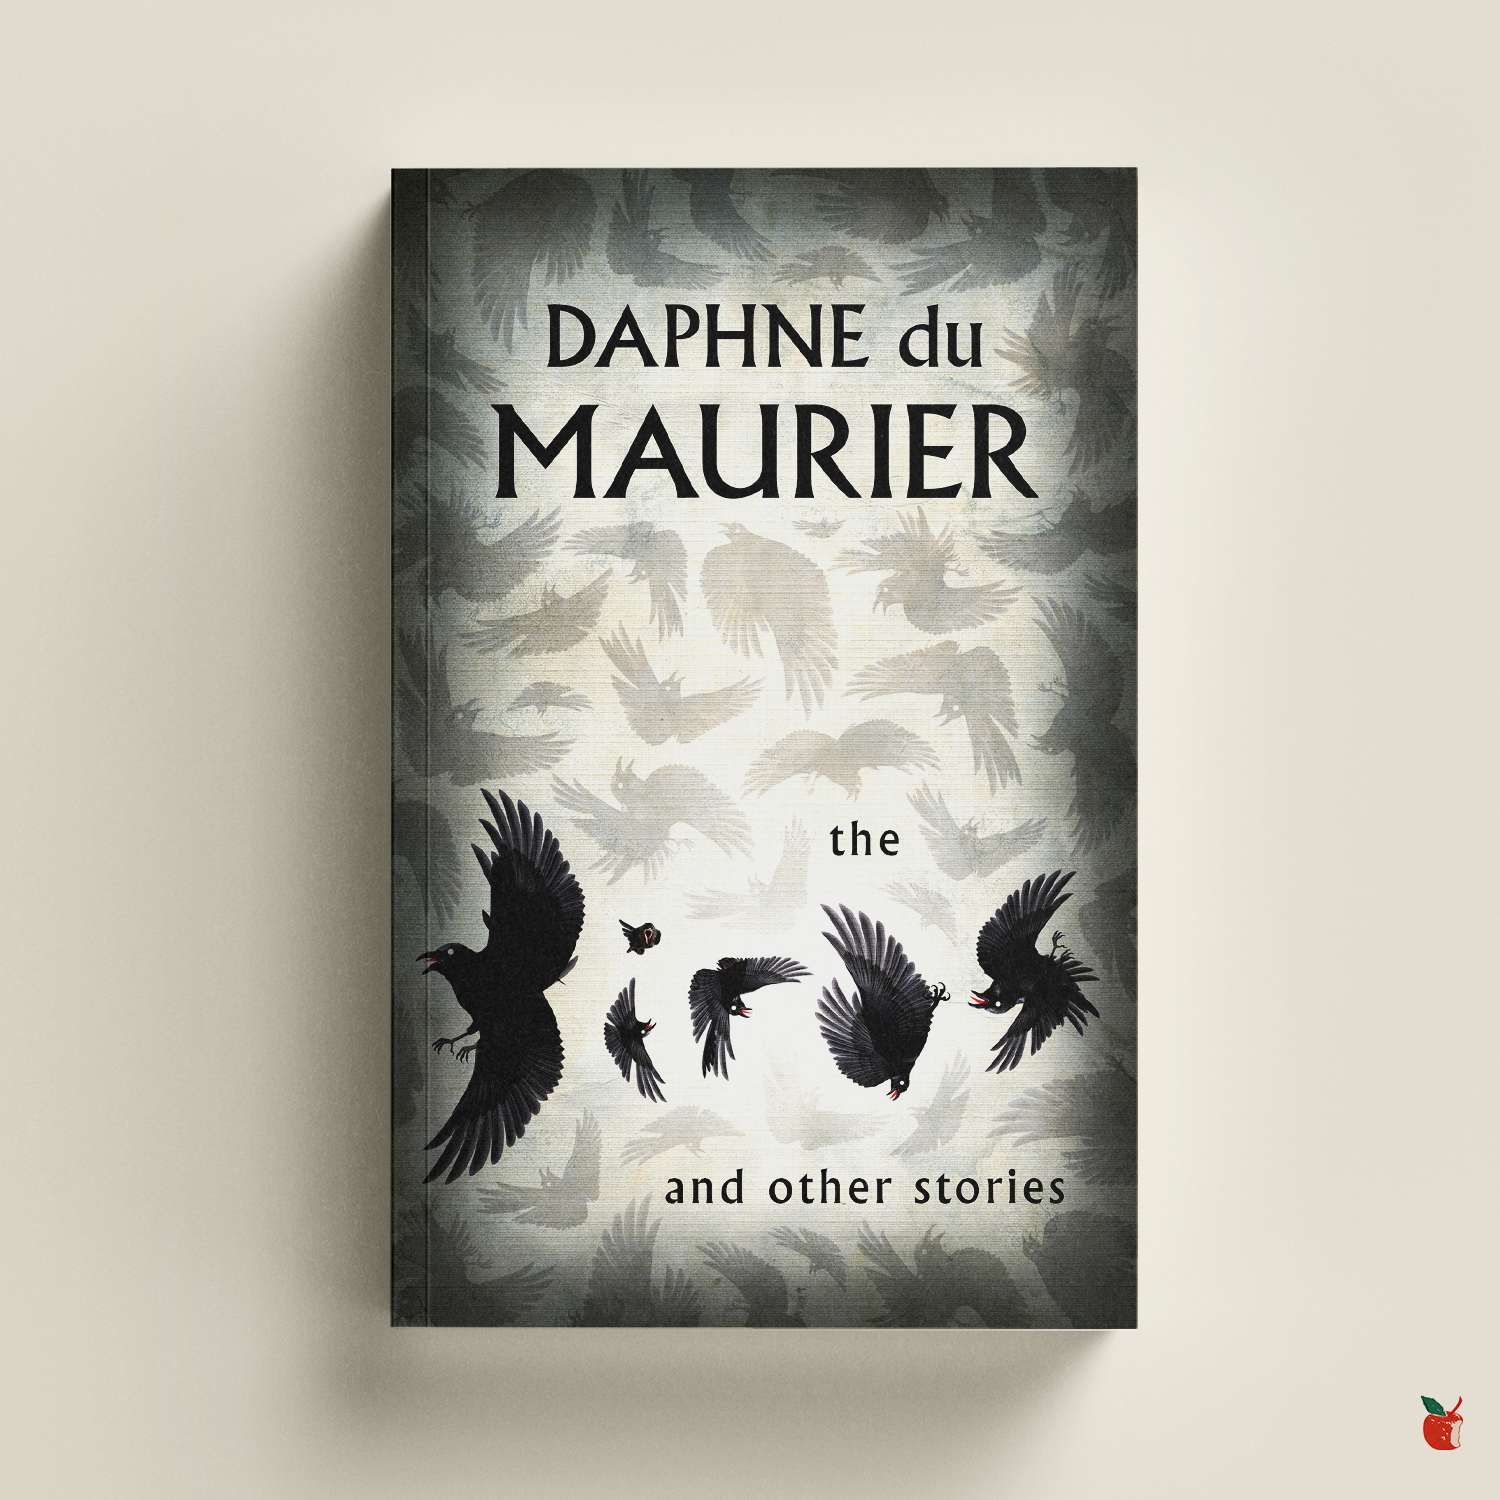 The Birds and other stories by Daphne du Maurier